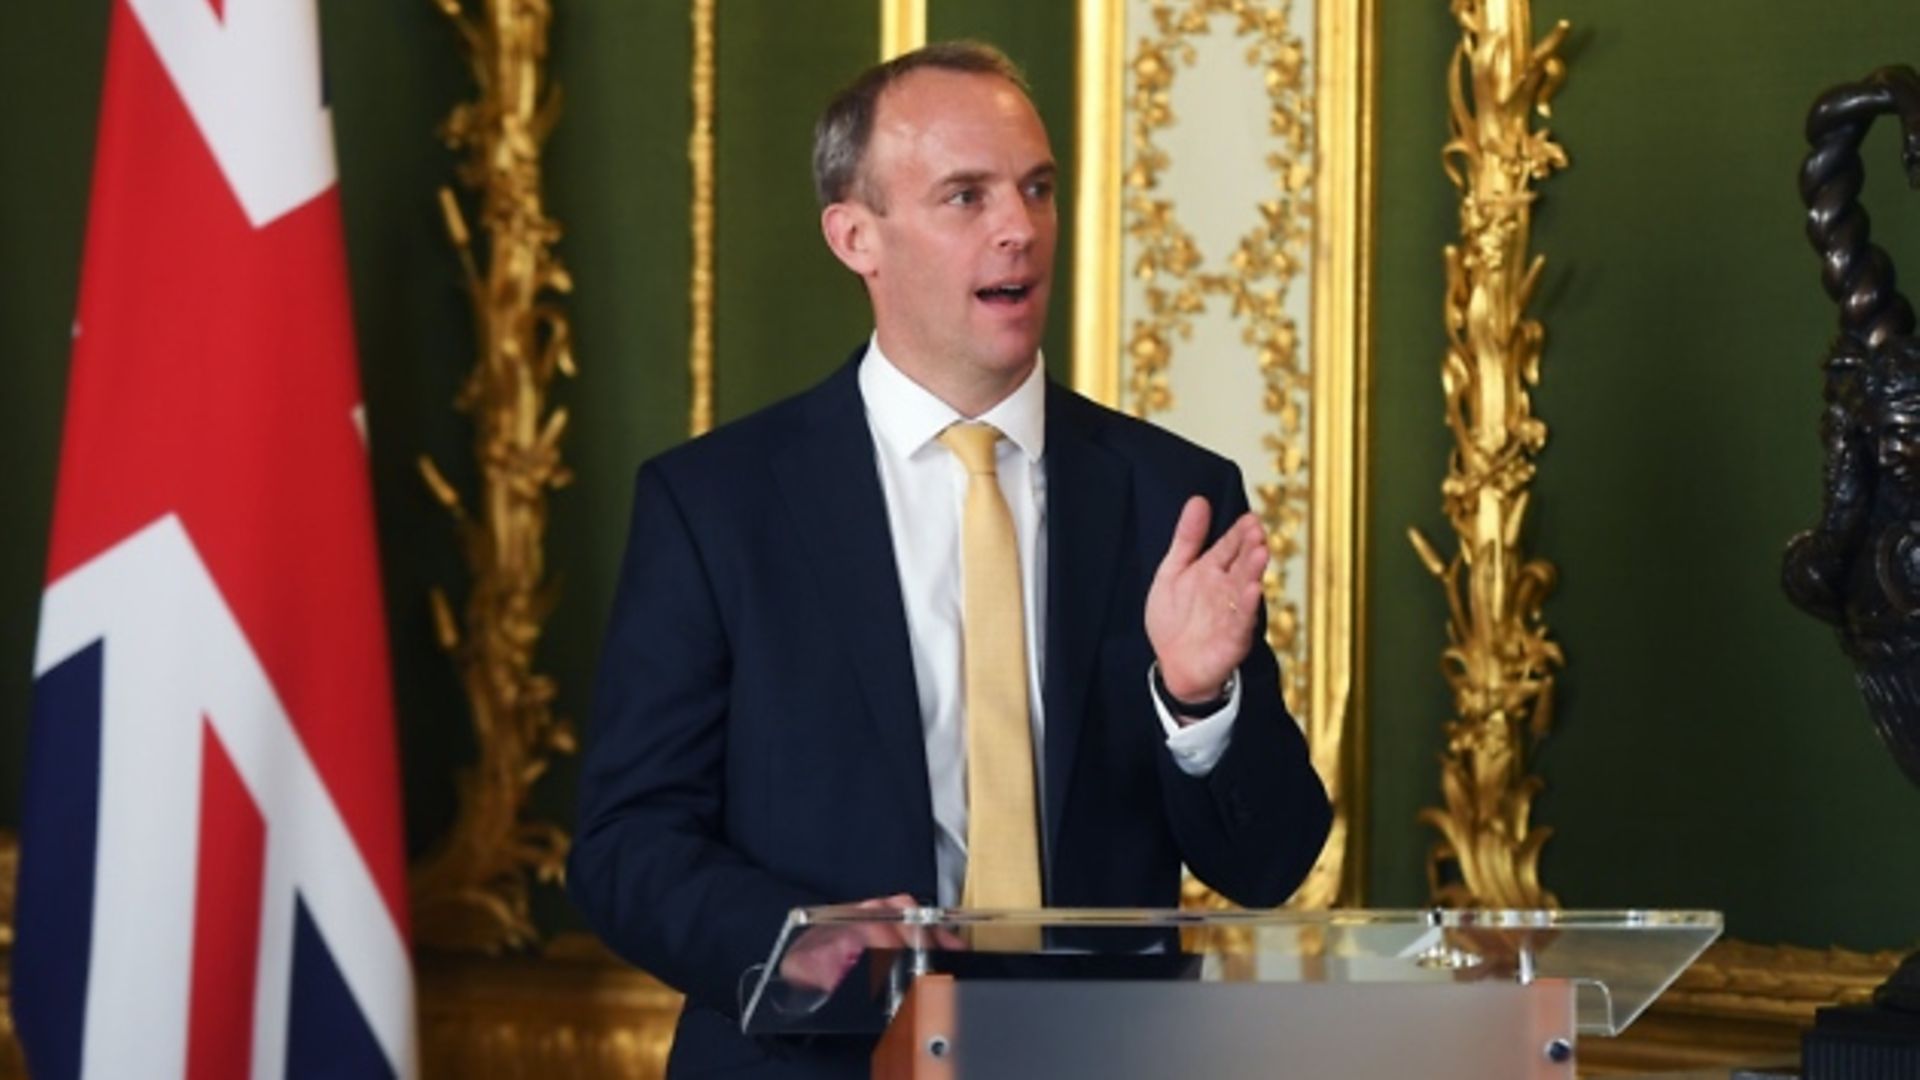 Foreign secretary Dominic Raab during a press conference. Photograph: Peter Summers/PA.